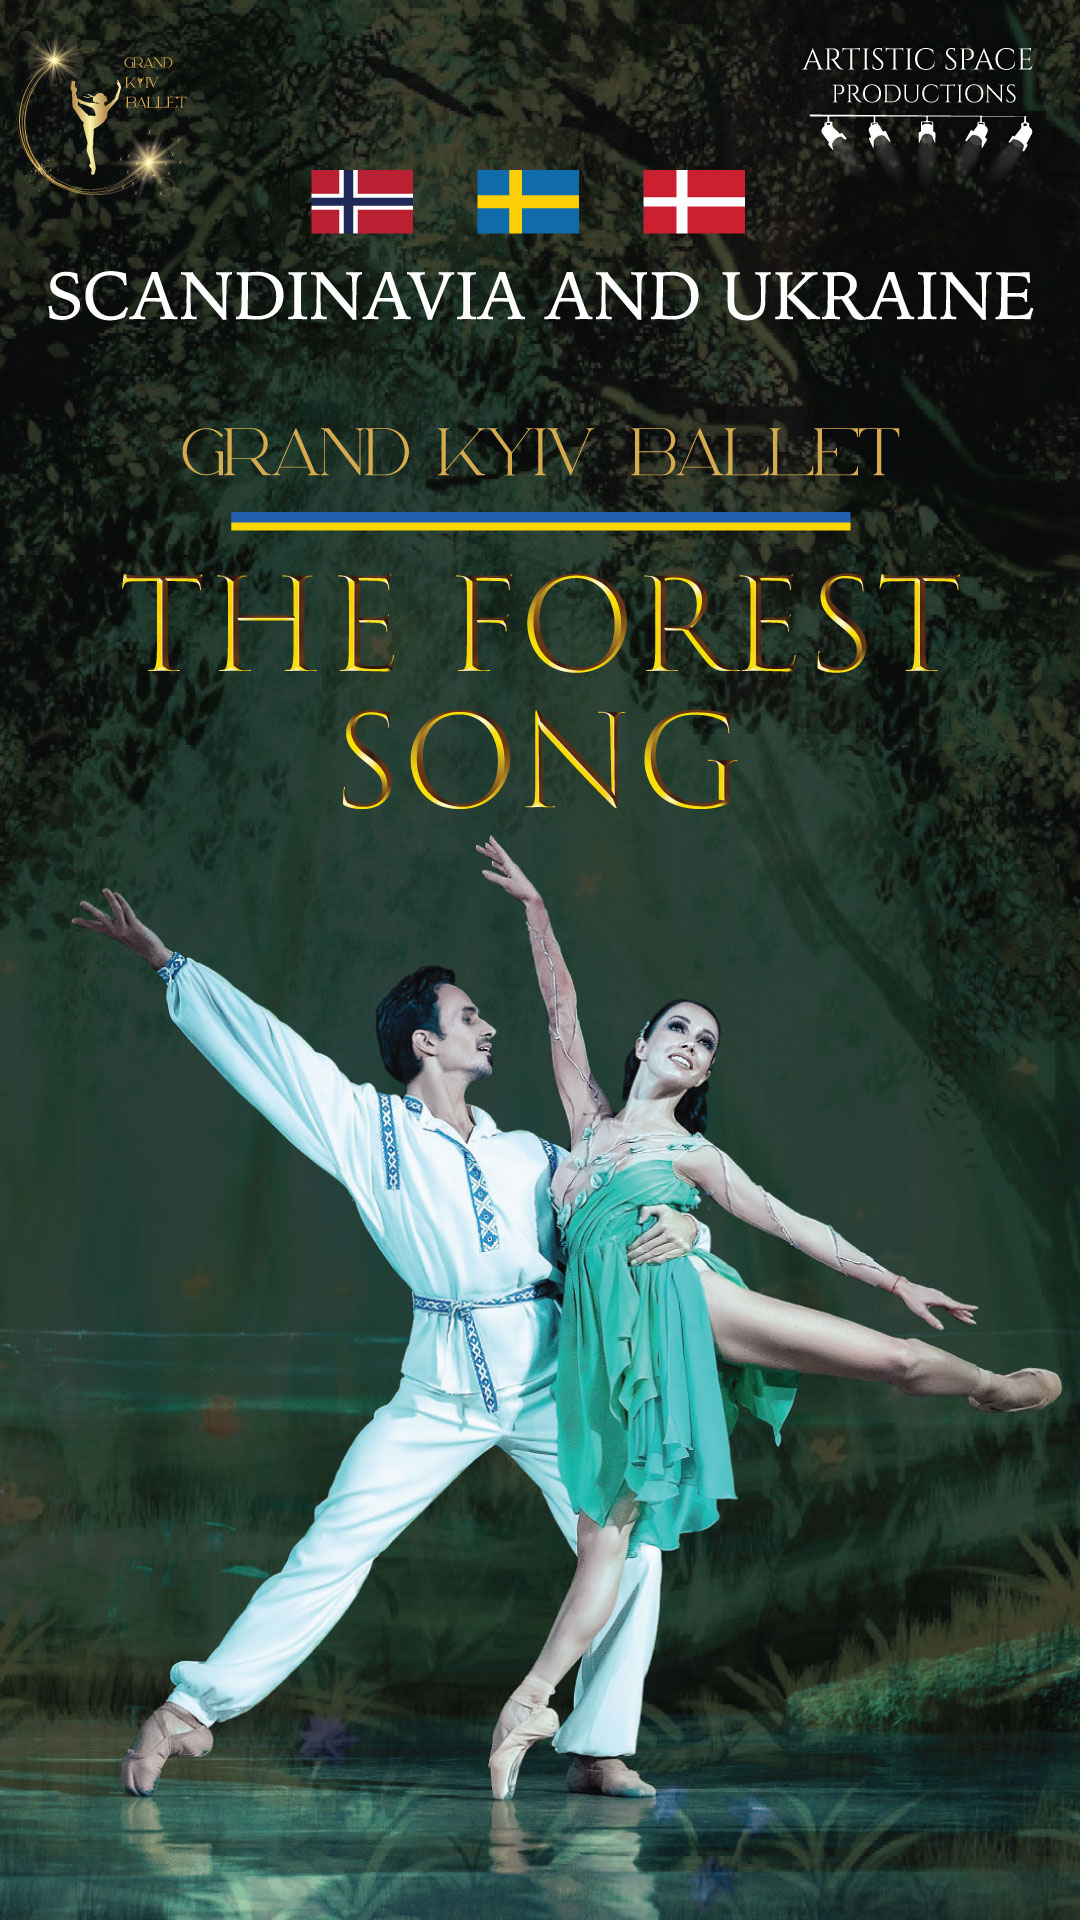 Ukrainian Feature 'Mavka. The Forest Song' Gets Global Theatrical